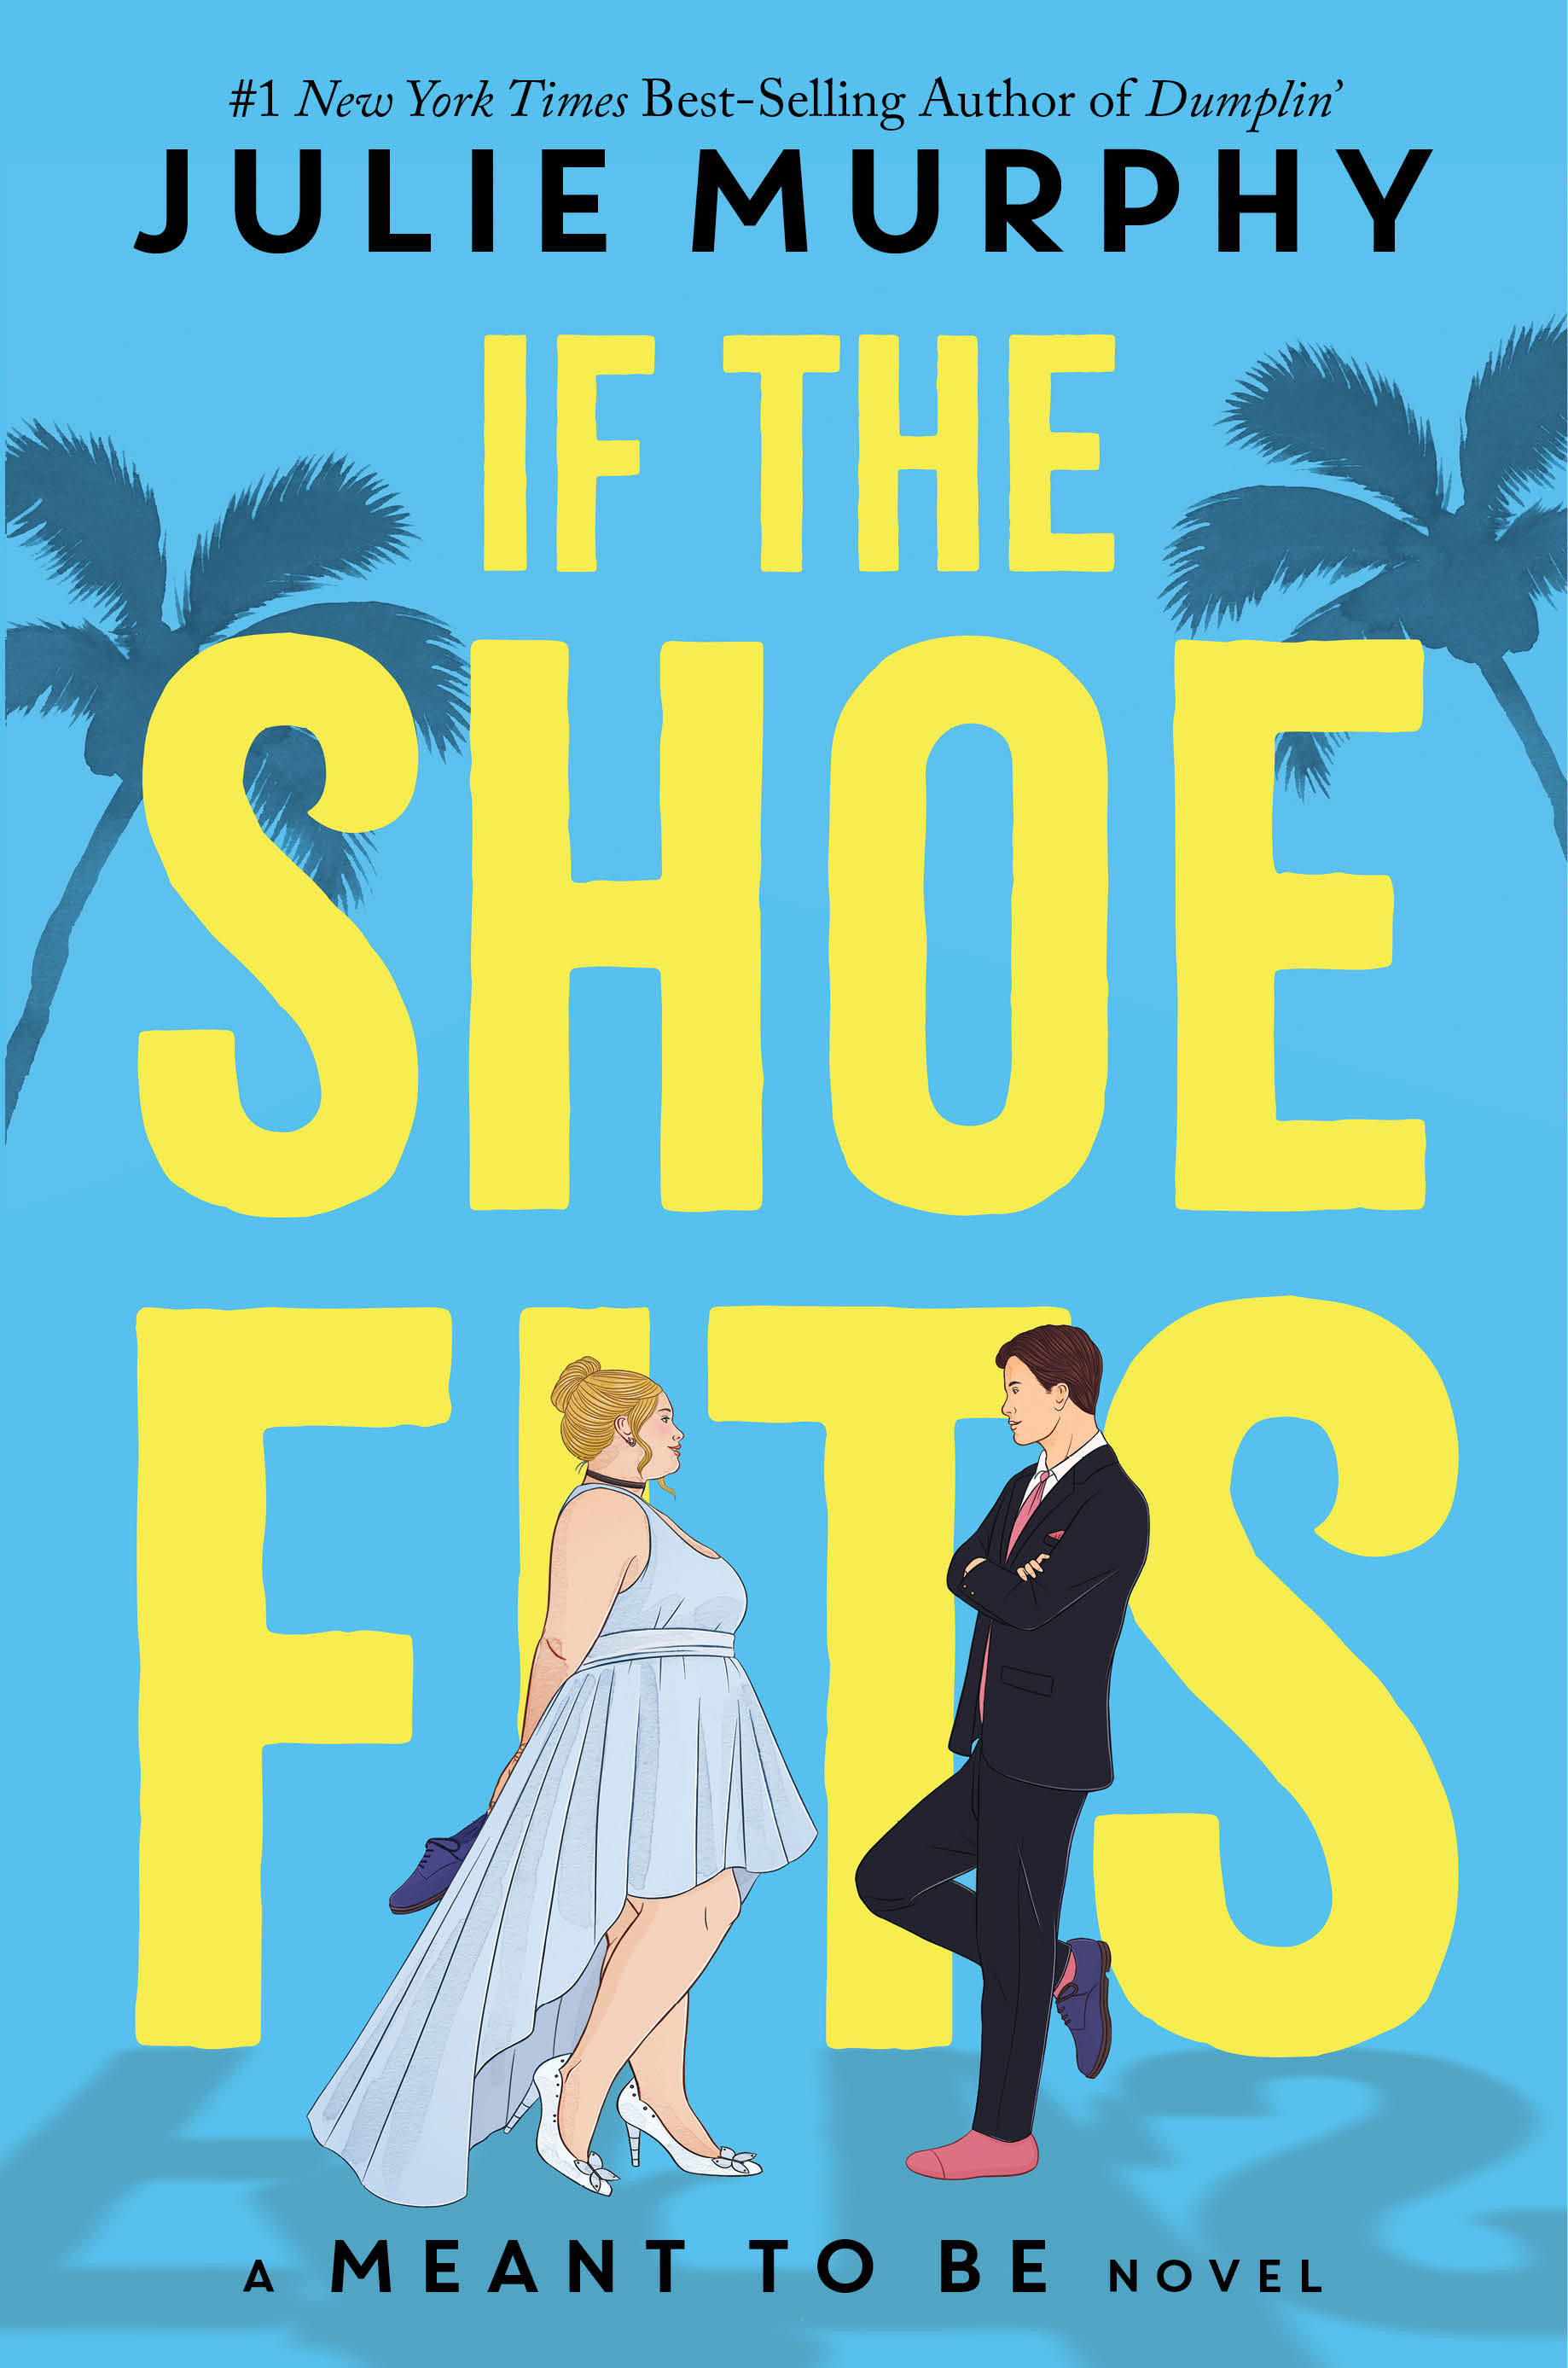 If The Shoe Fits-A Meant To Be Novel (Hardcover Book)